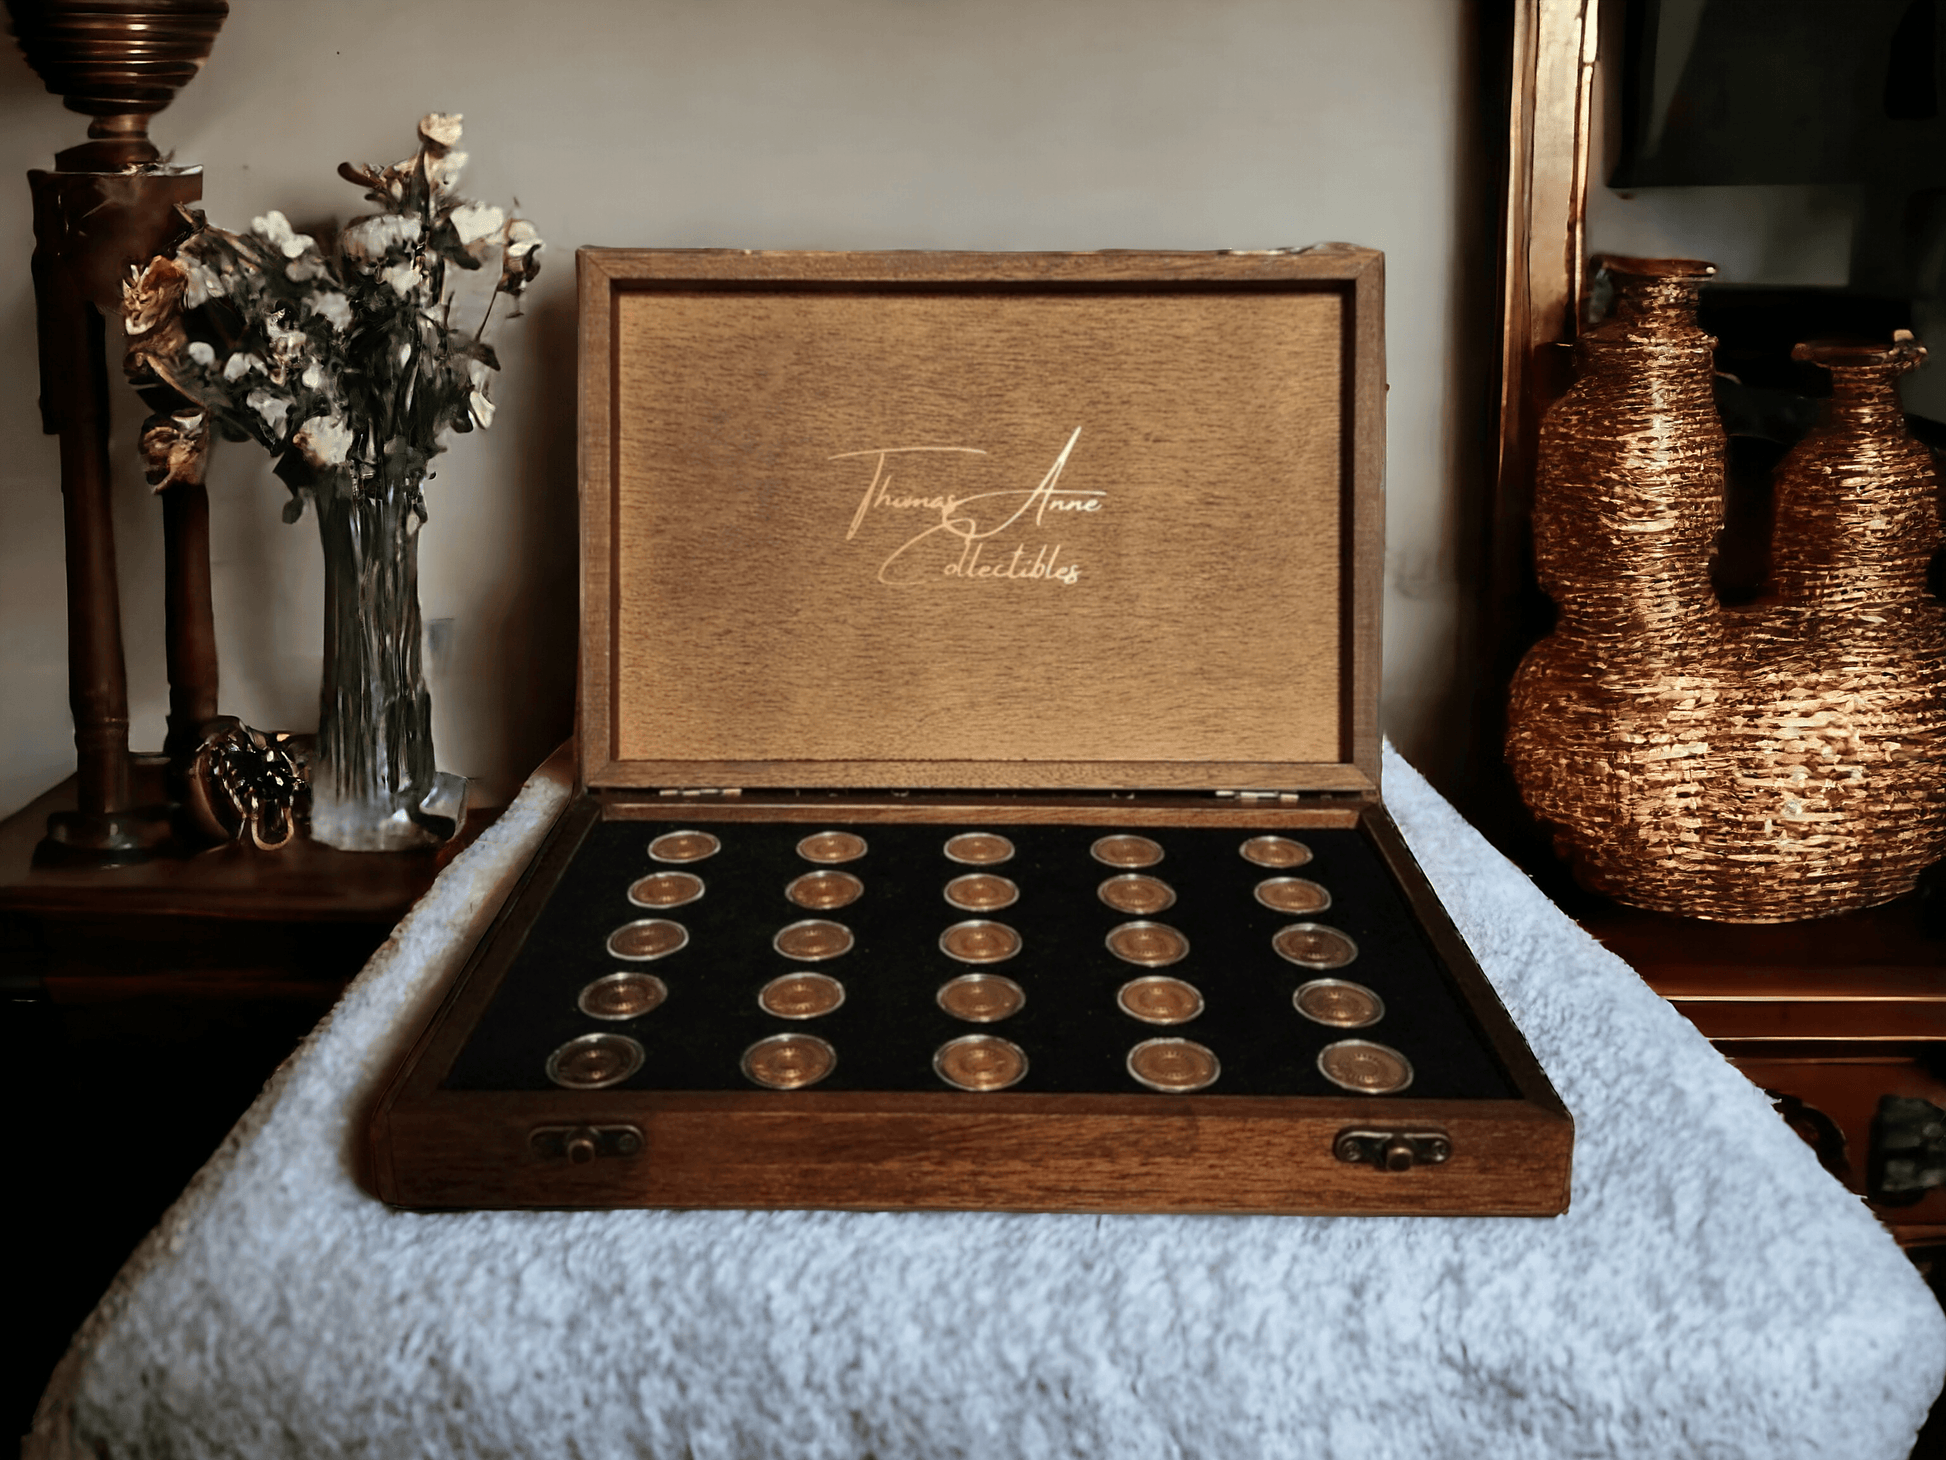 Artisan-Crafted Mahogany $2 Display Case - Thomas Anne Collectibles